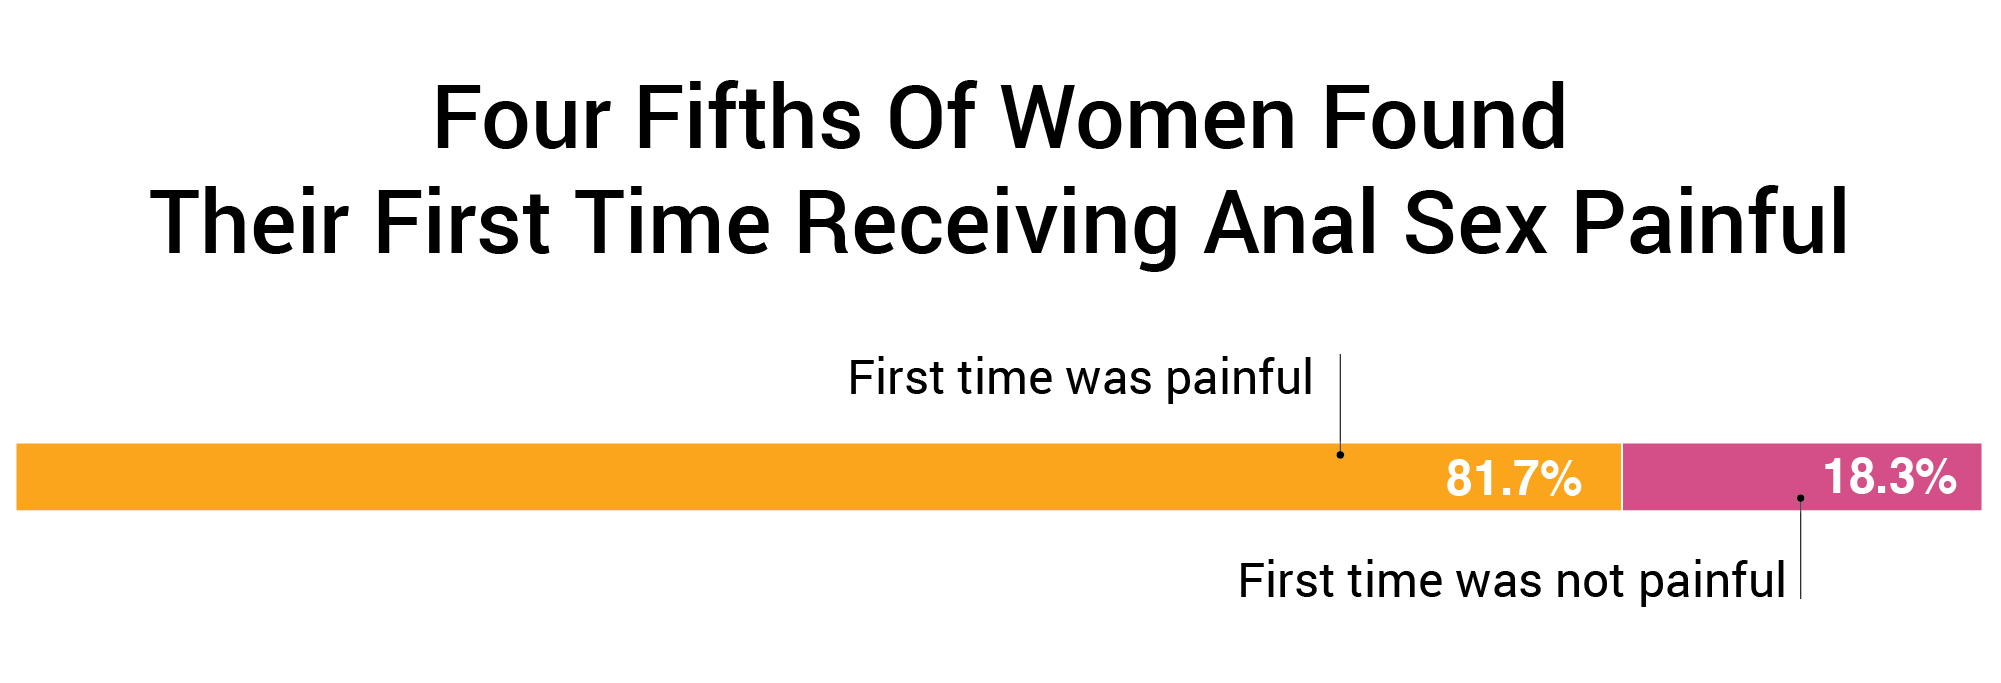 81.7 percent of women found their first time receiving anal sex painful